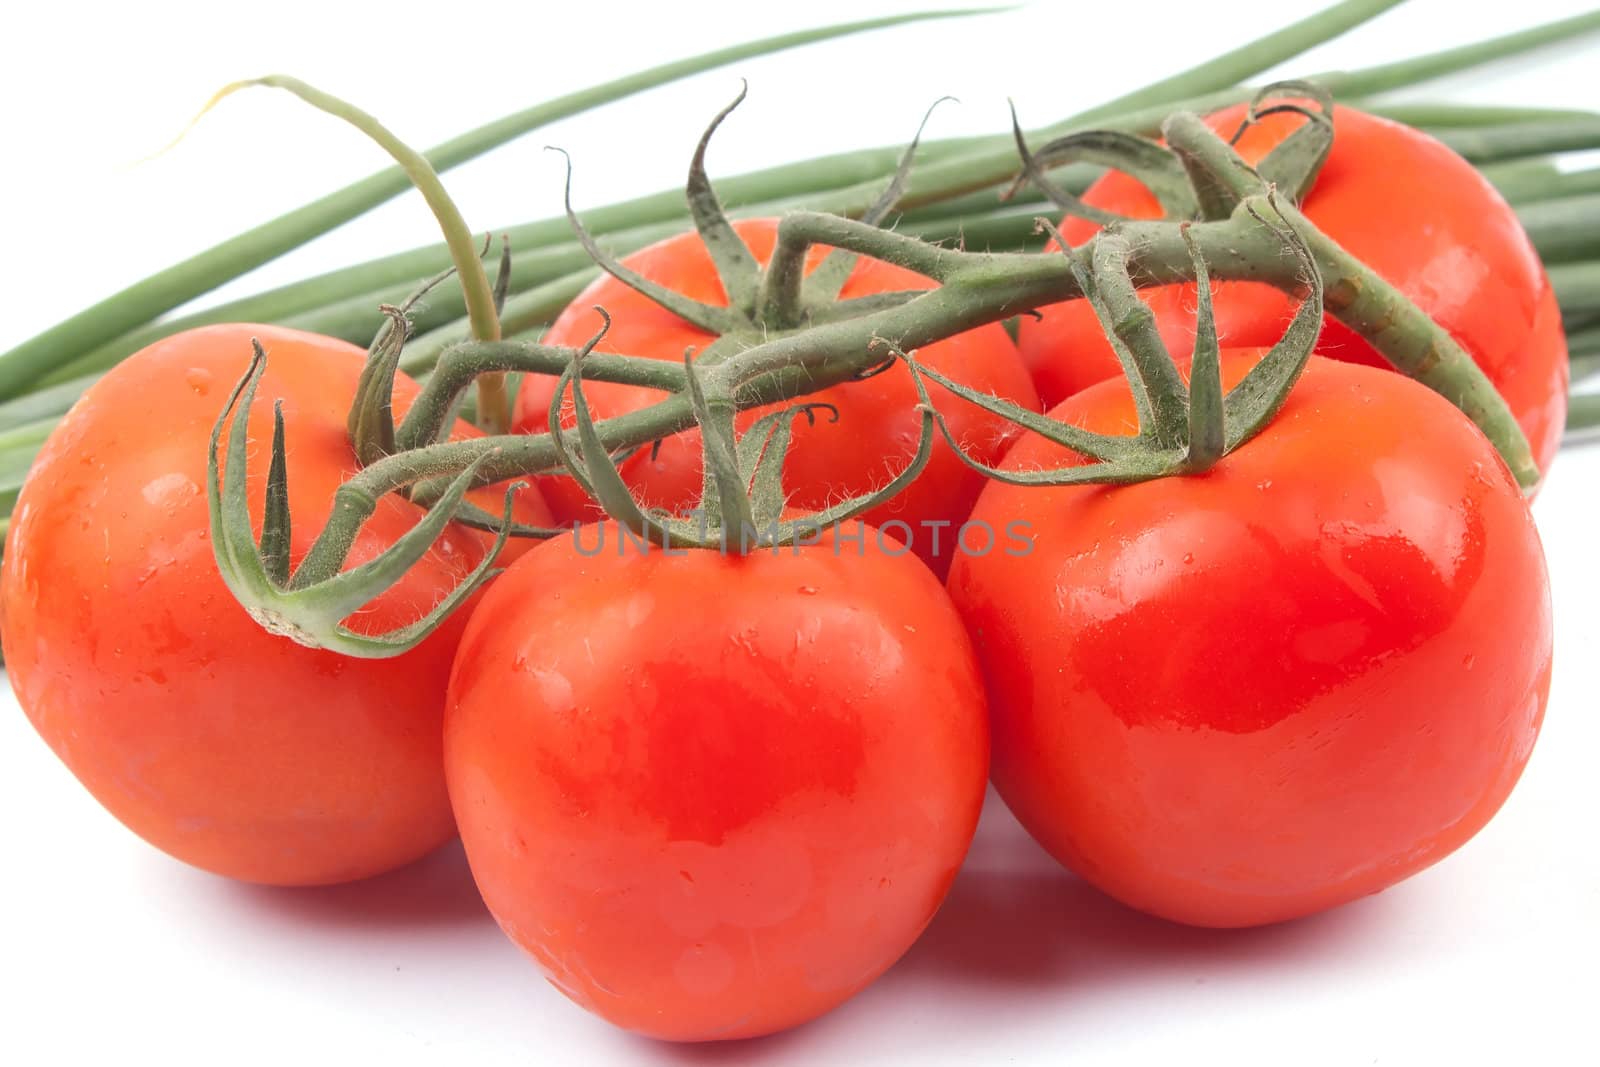 Red tomatoes on a branch on a white background